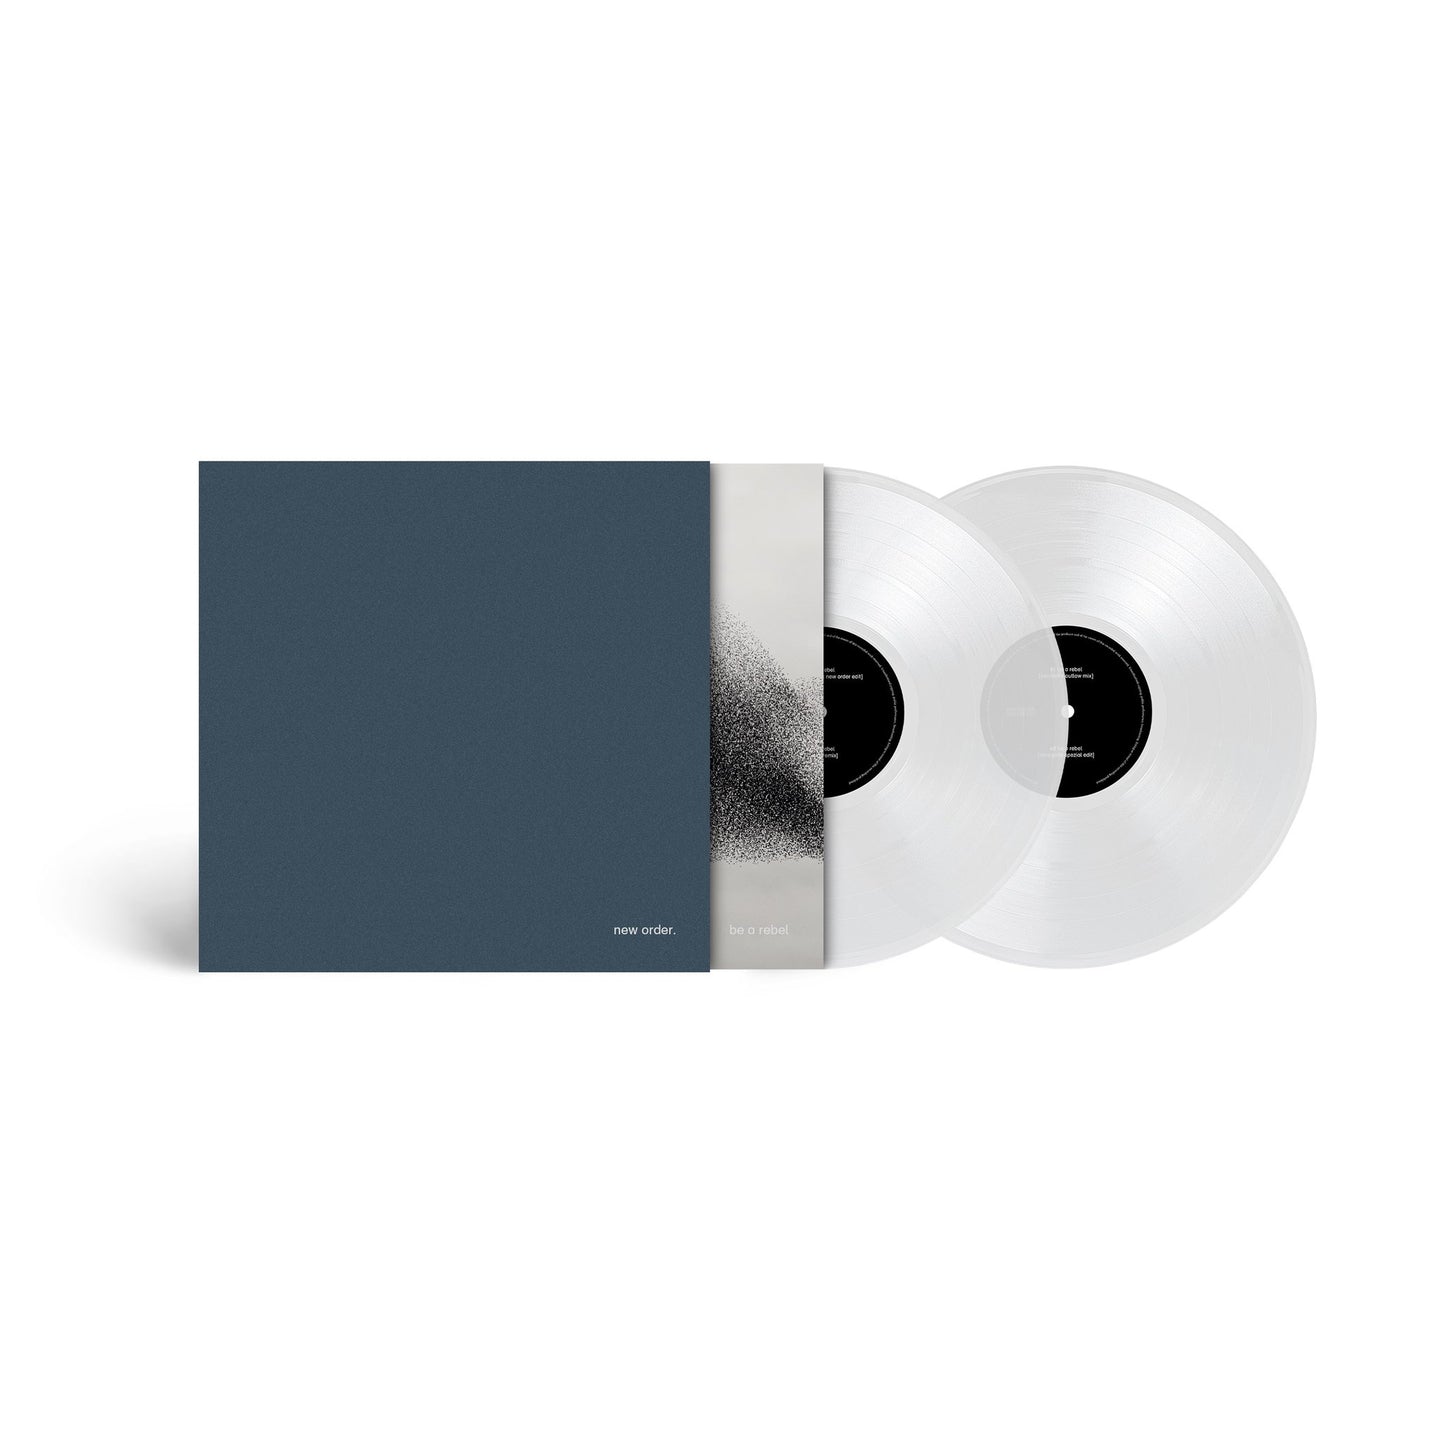 New Order - Be A Rebel Remixed [2LP] (Clear Vinyl, limited)